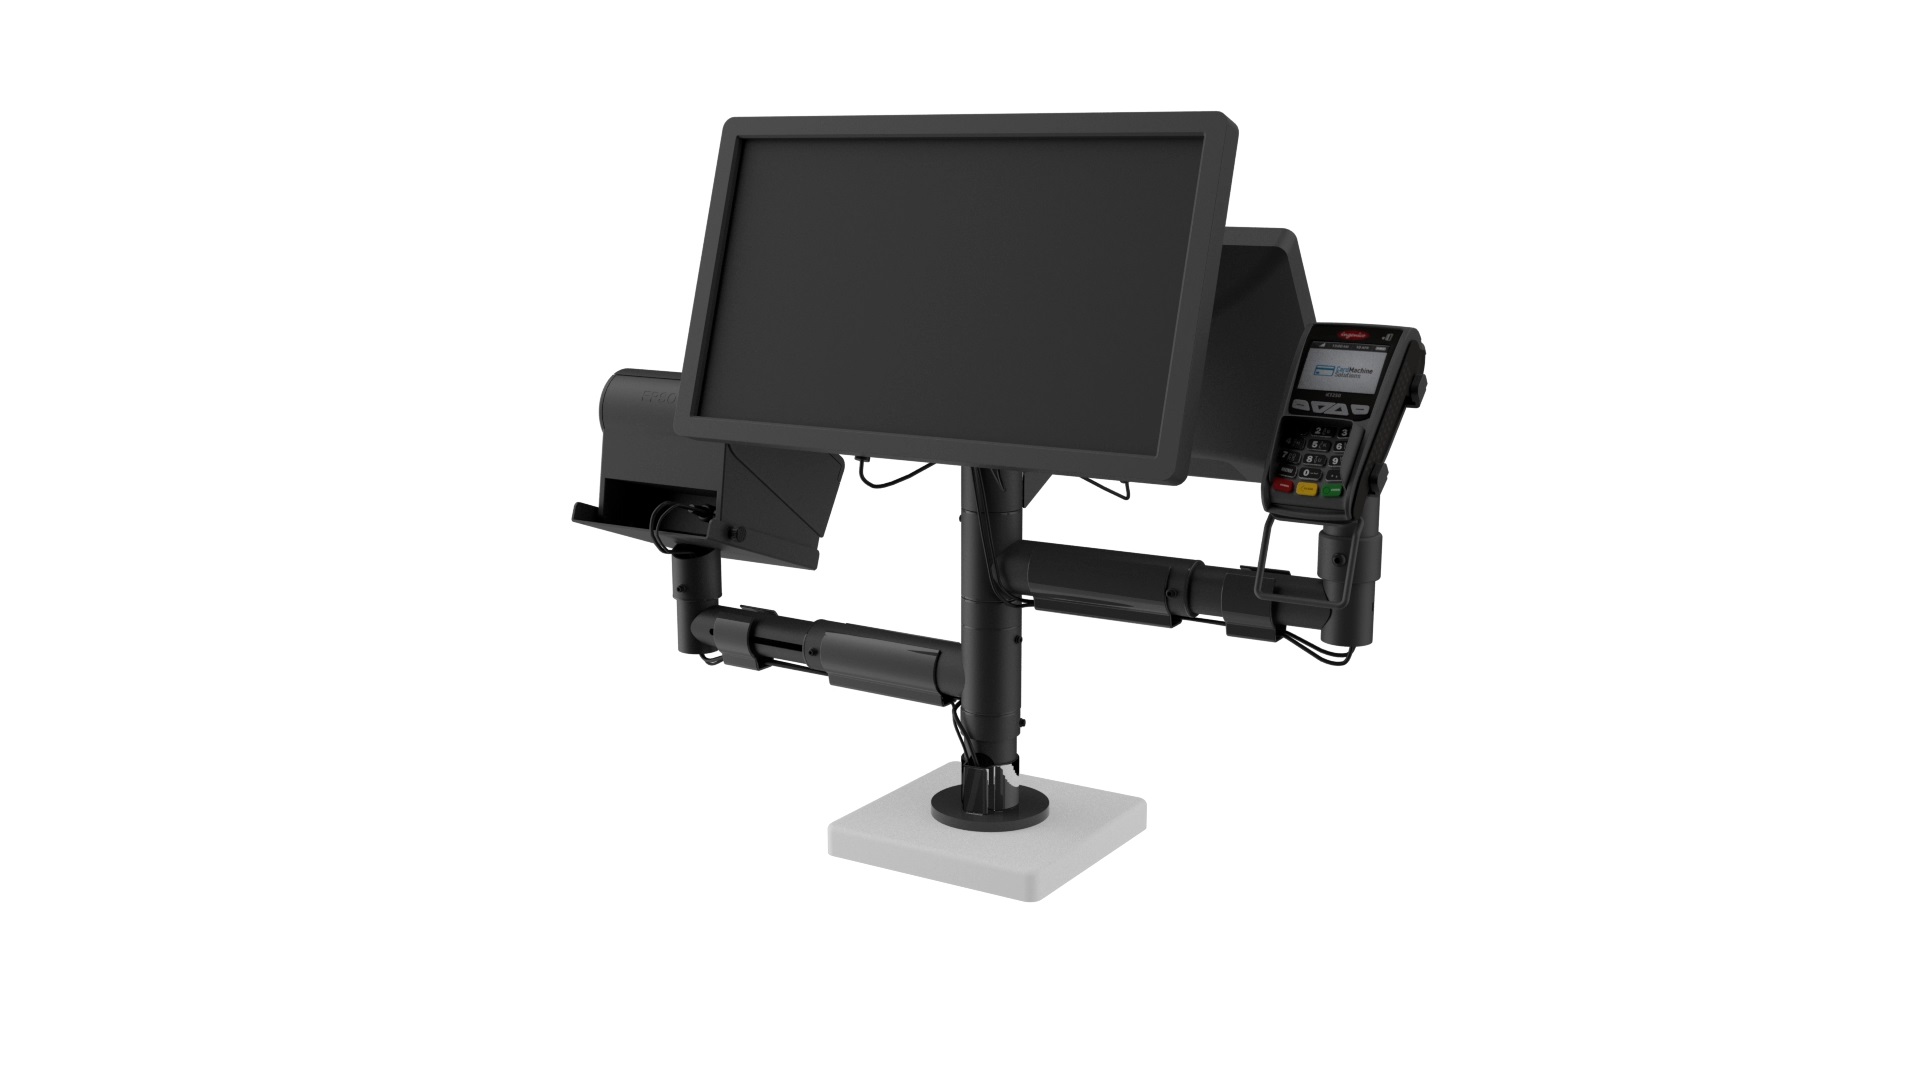 POS modular mount with two VESA stands and two arms.